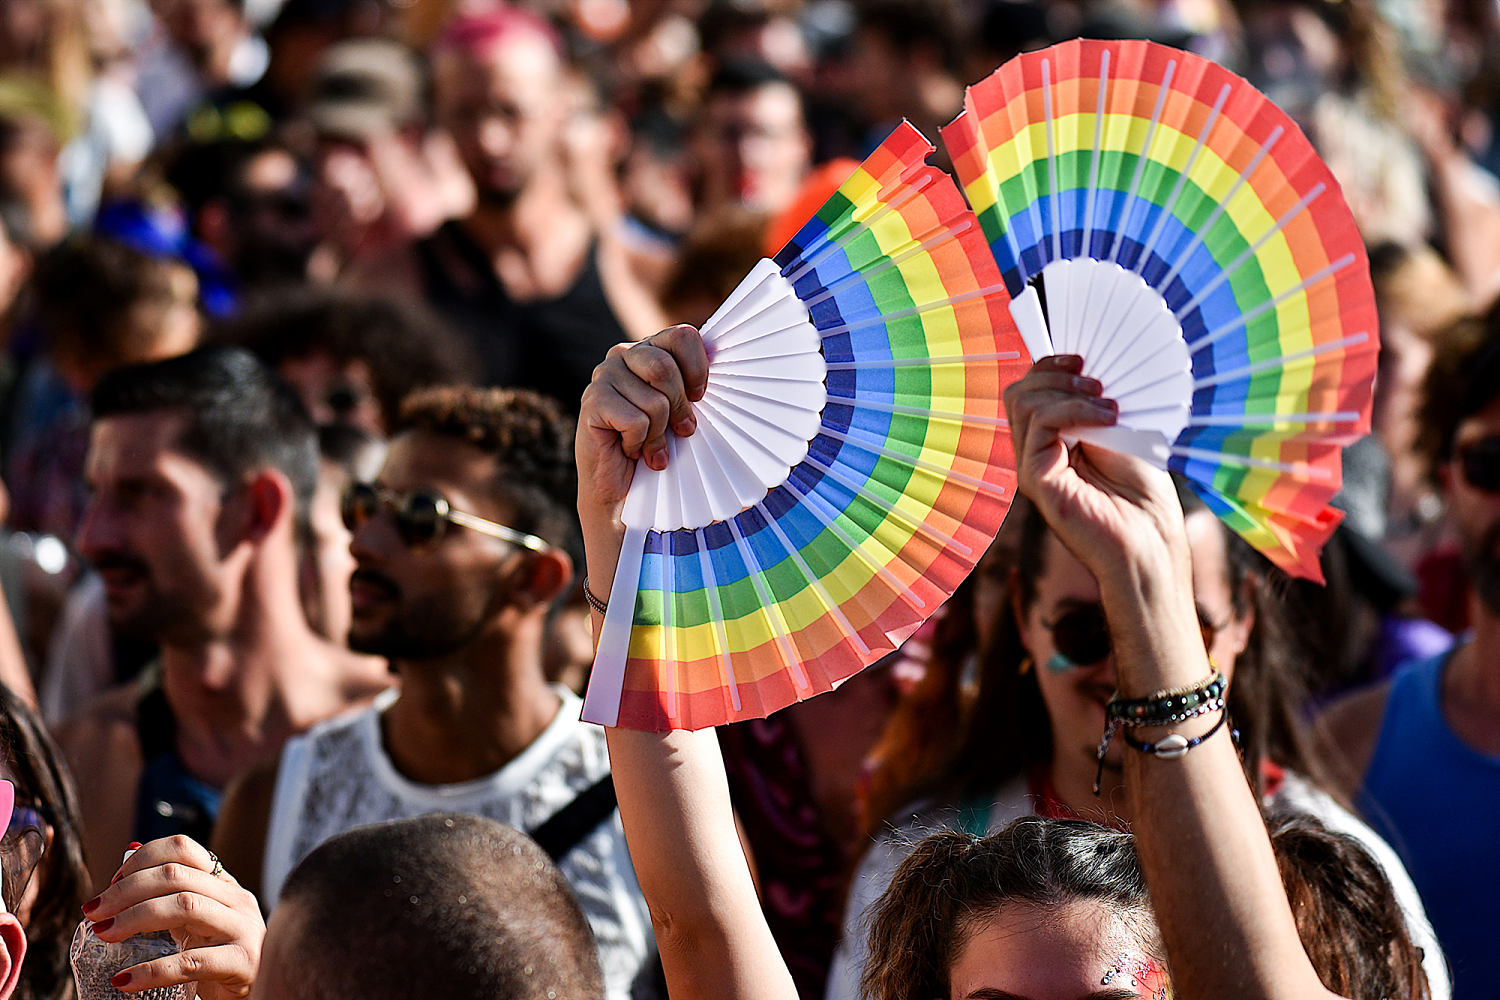 LGBTQ people in the E.U. face less discrimination but more violence, survey finds